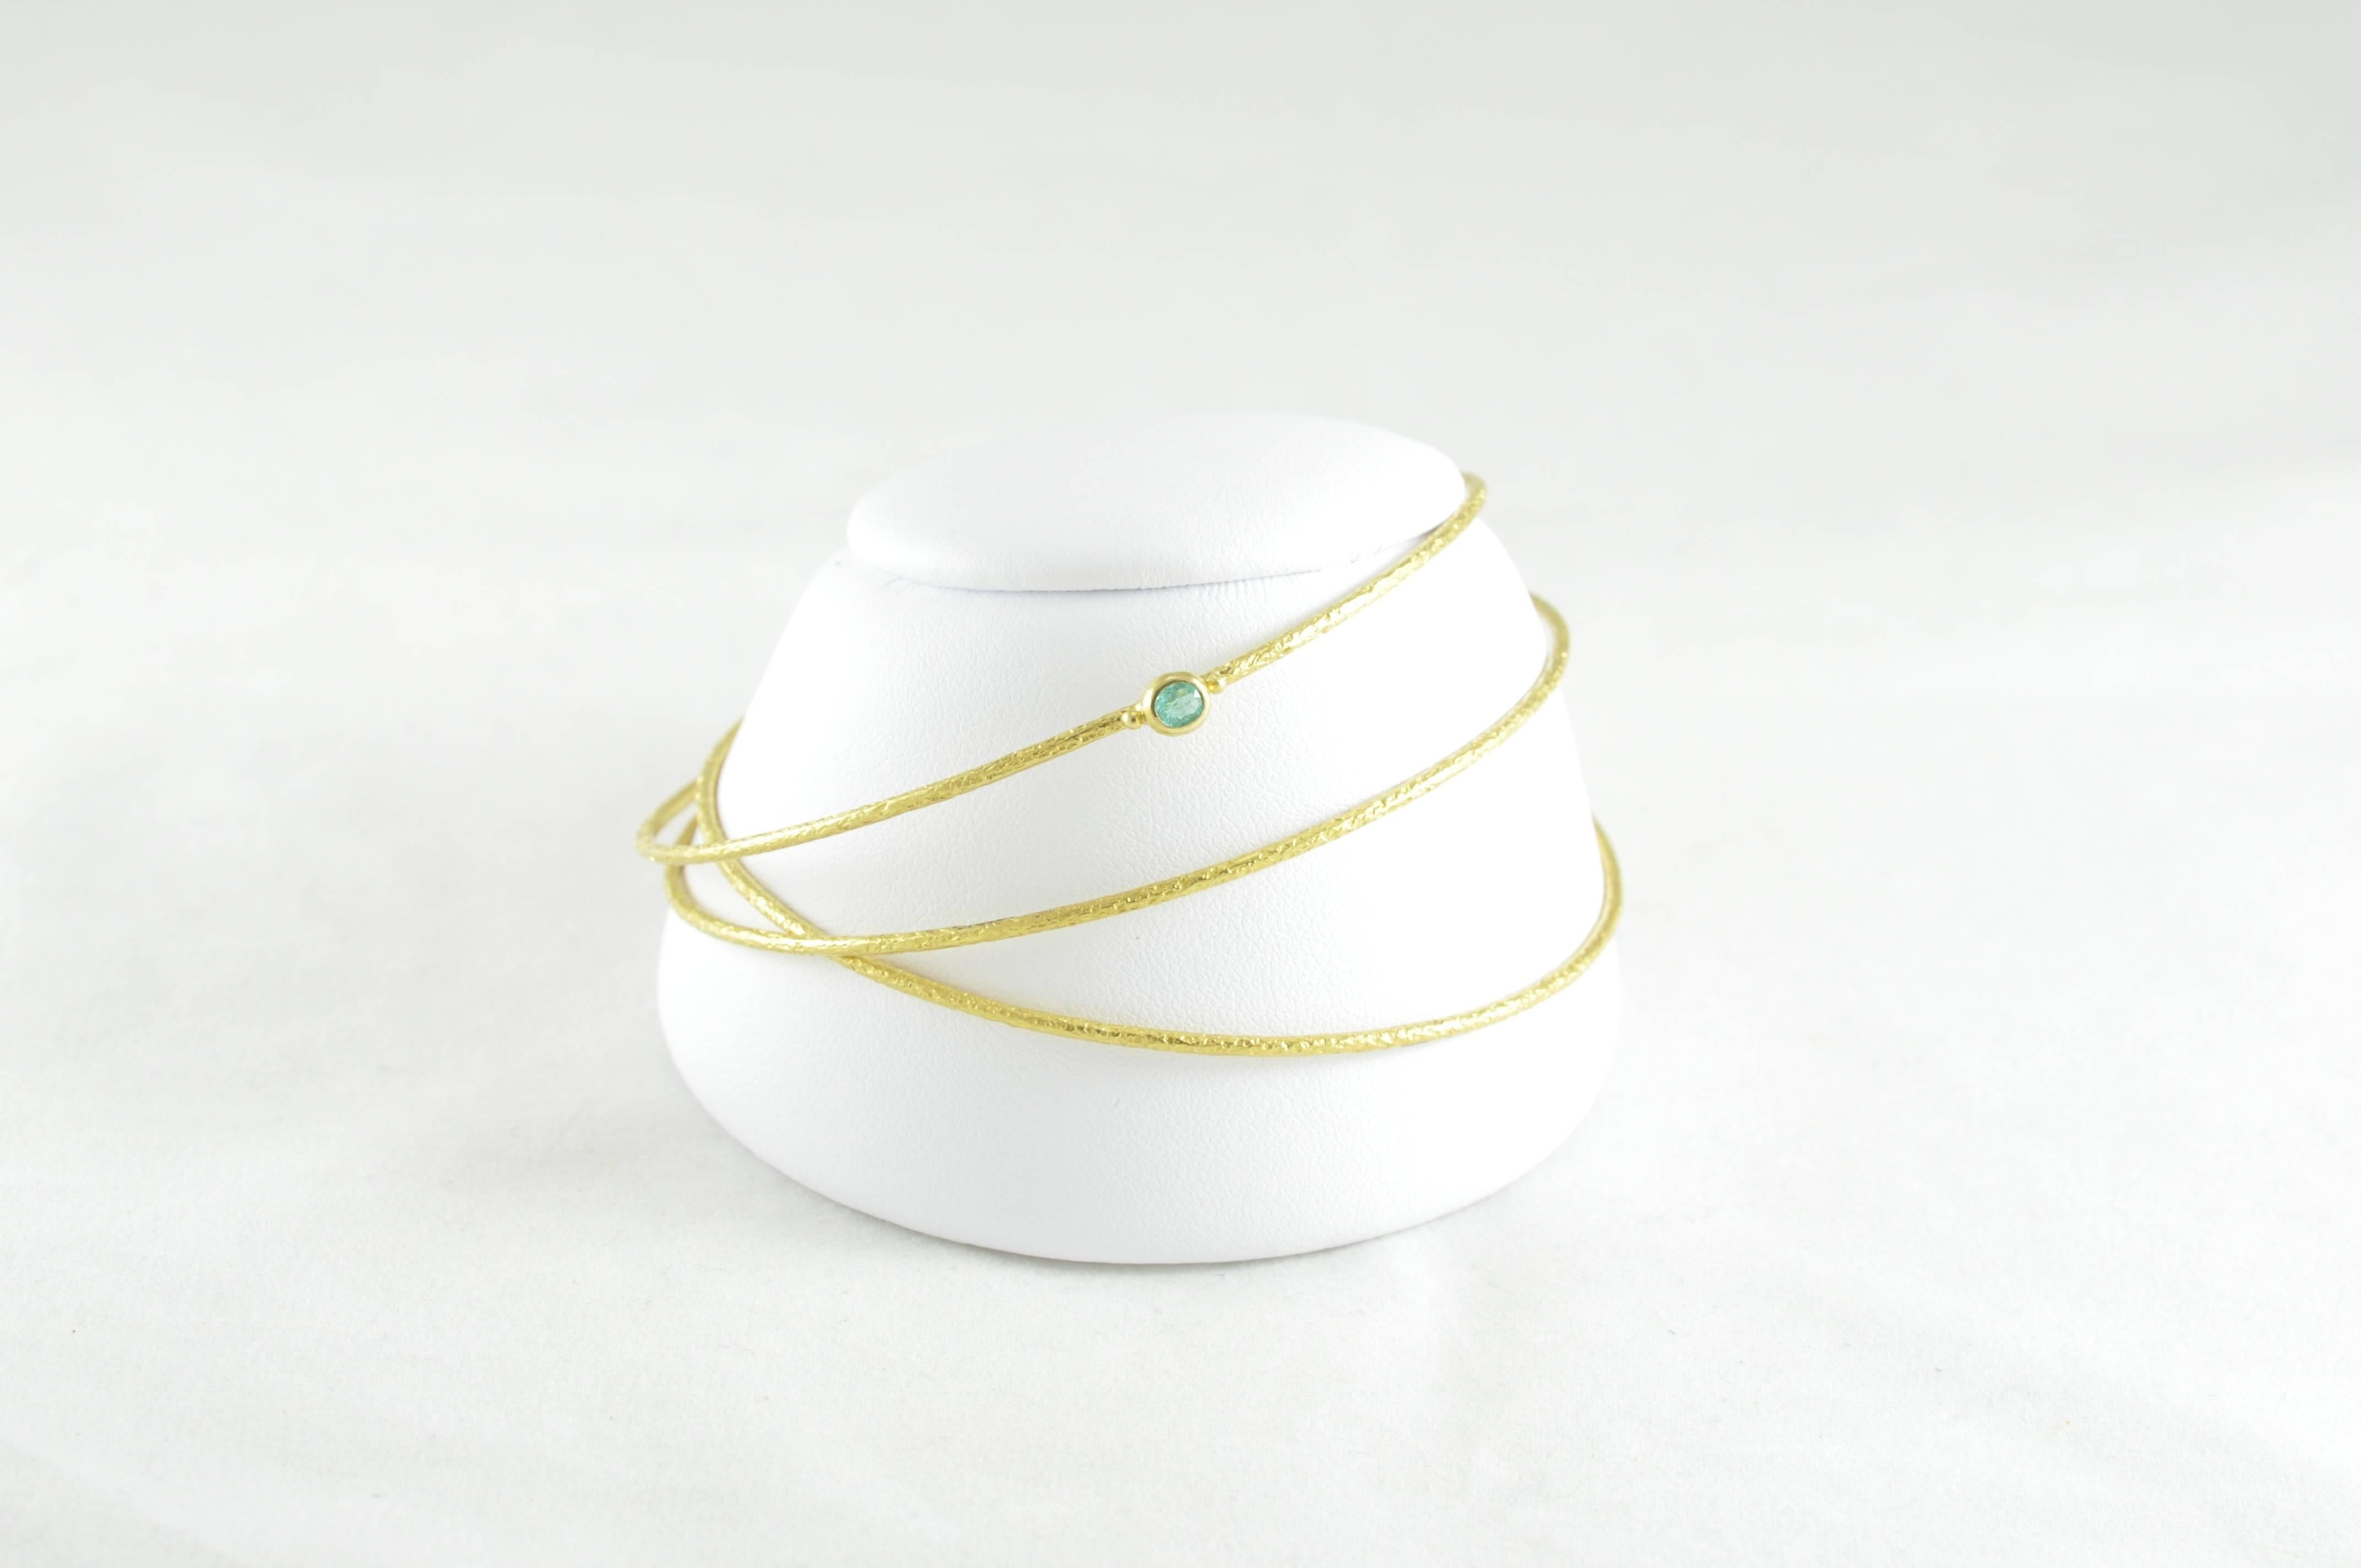 20k Gold Hammered Bangle set designed by Kimarie. Two of the Bangles are plain and one is adorned with a natural, bezel-set Emerald. The bracelets have a diameter of 2.75 inches each. Big impact look for such delicate, yet durable, quality